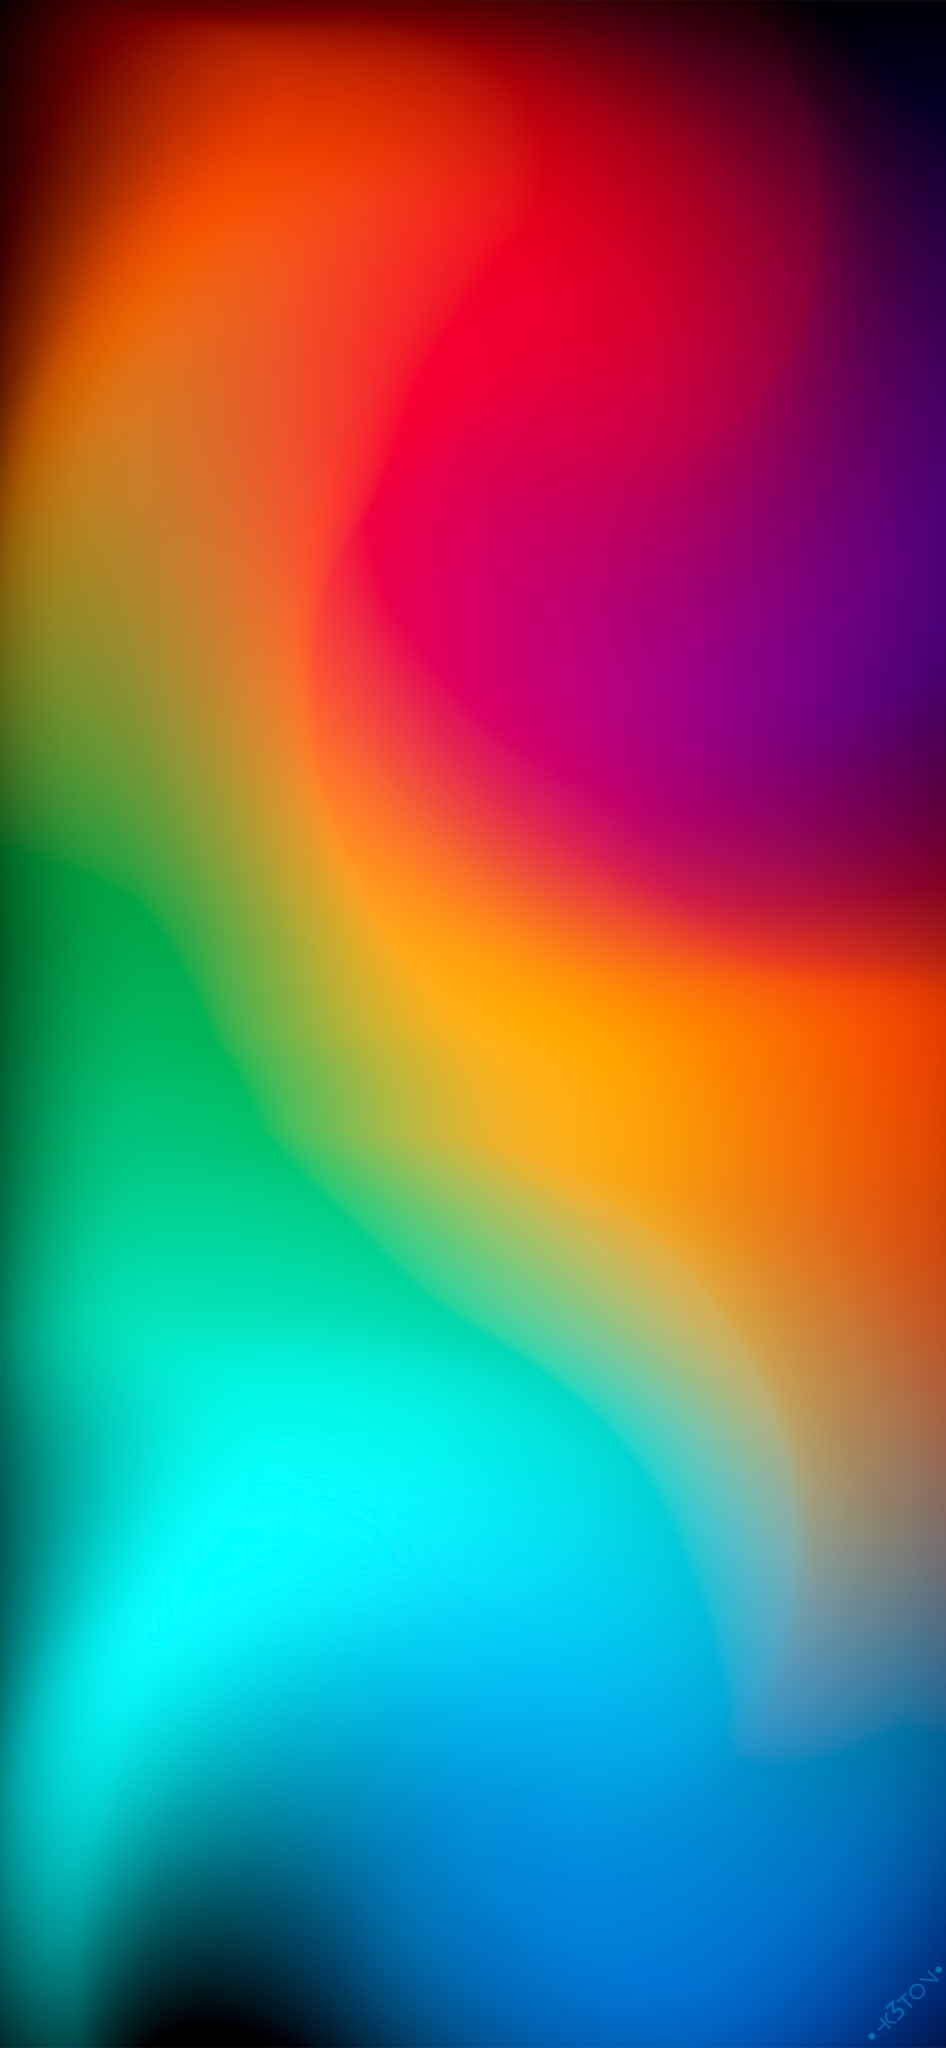 iOS 15 Beta 7 – Vibrant HDR colors by Hk3ToN | Zollotech